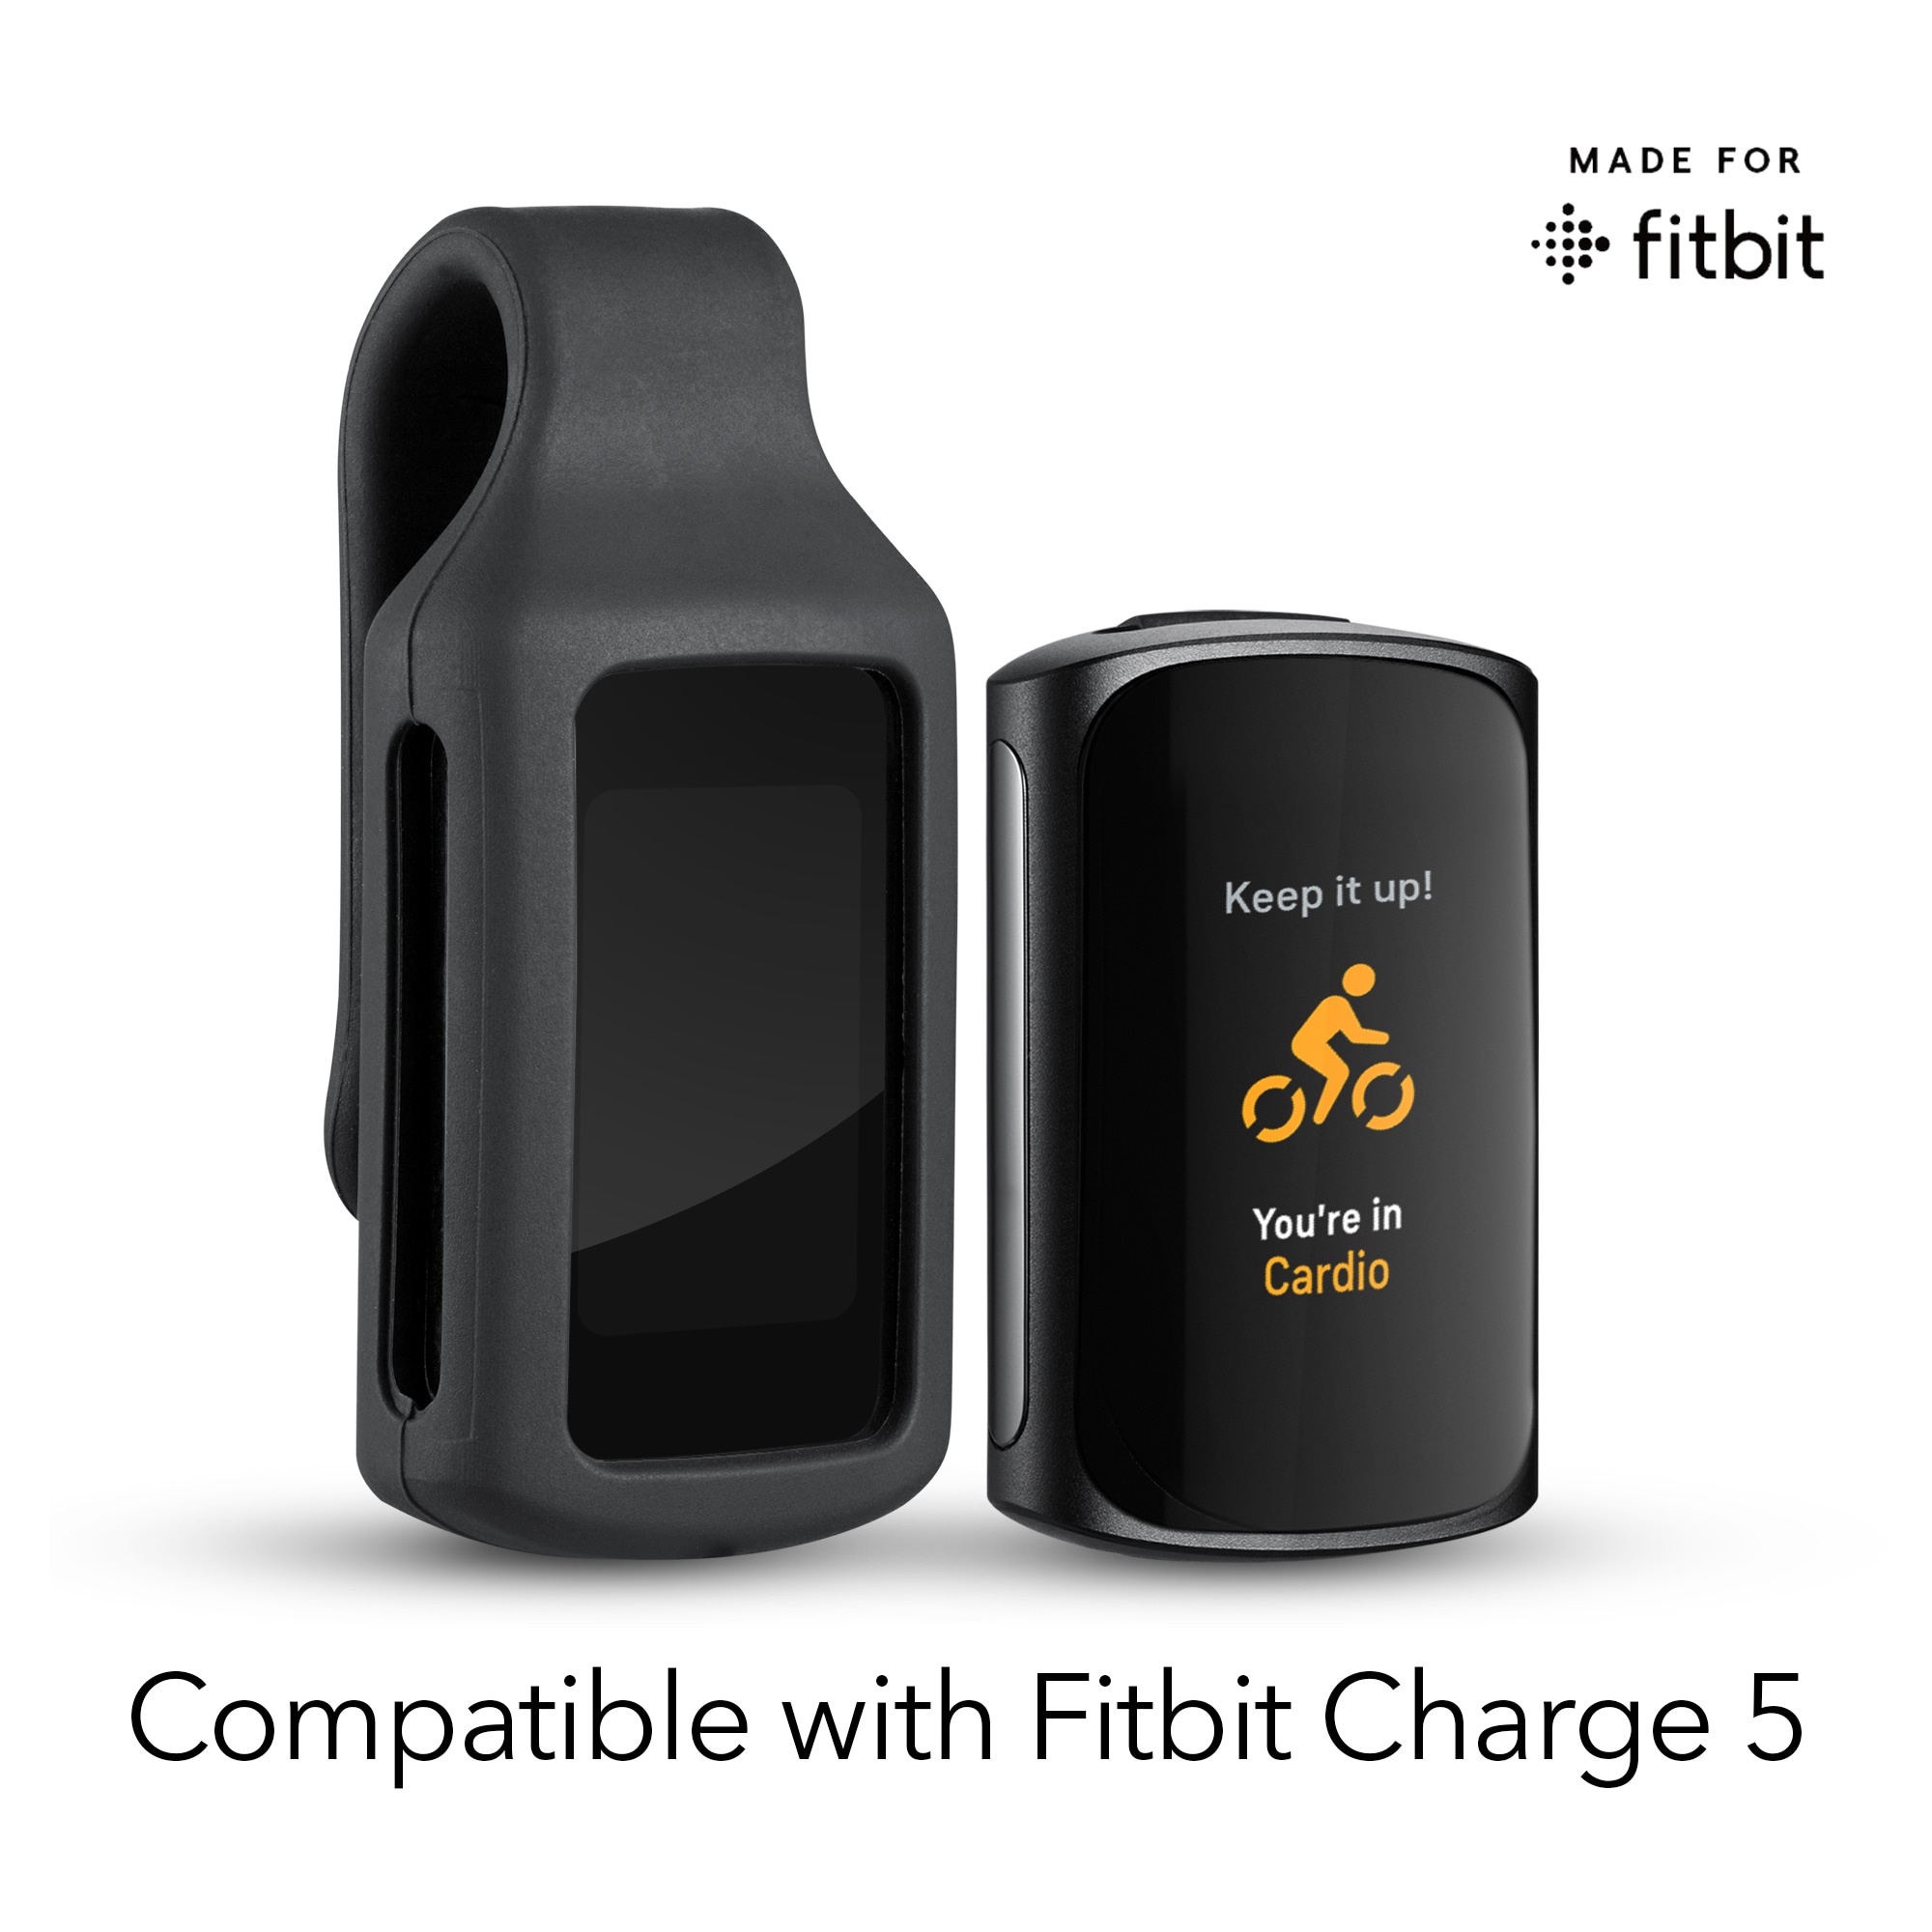 Wasserstein Clip Holder Compatible with Fitbit Charge 5 - Clip